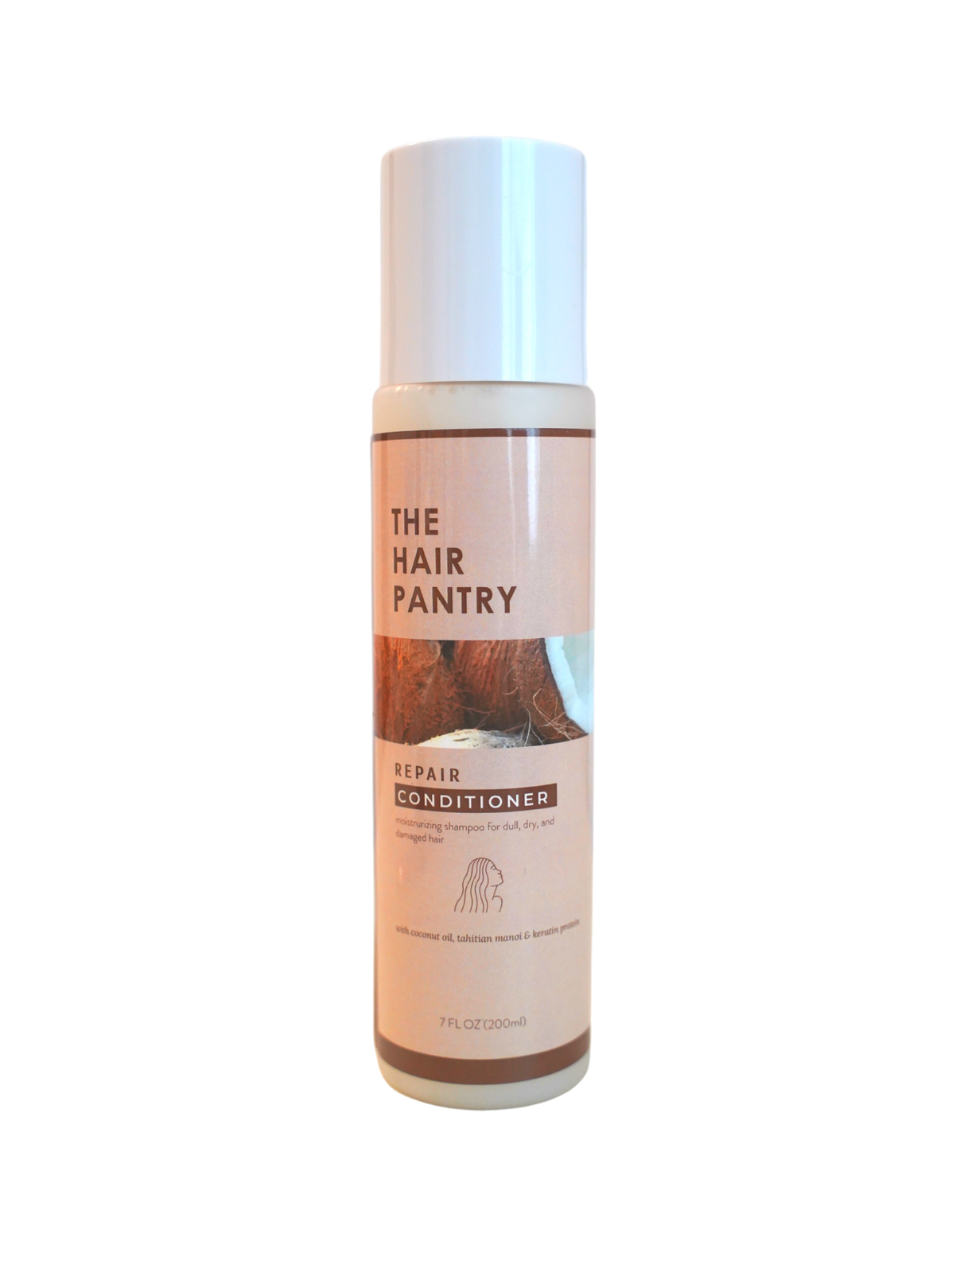 https://thehairpantry.com/product/shampoo-for-hair-fall/